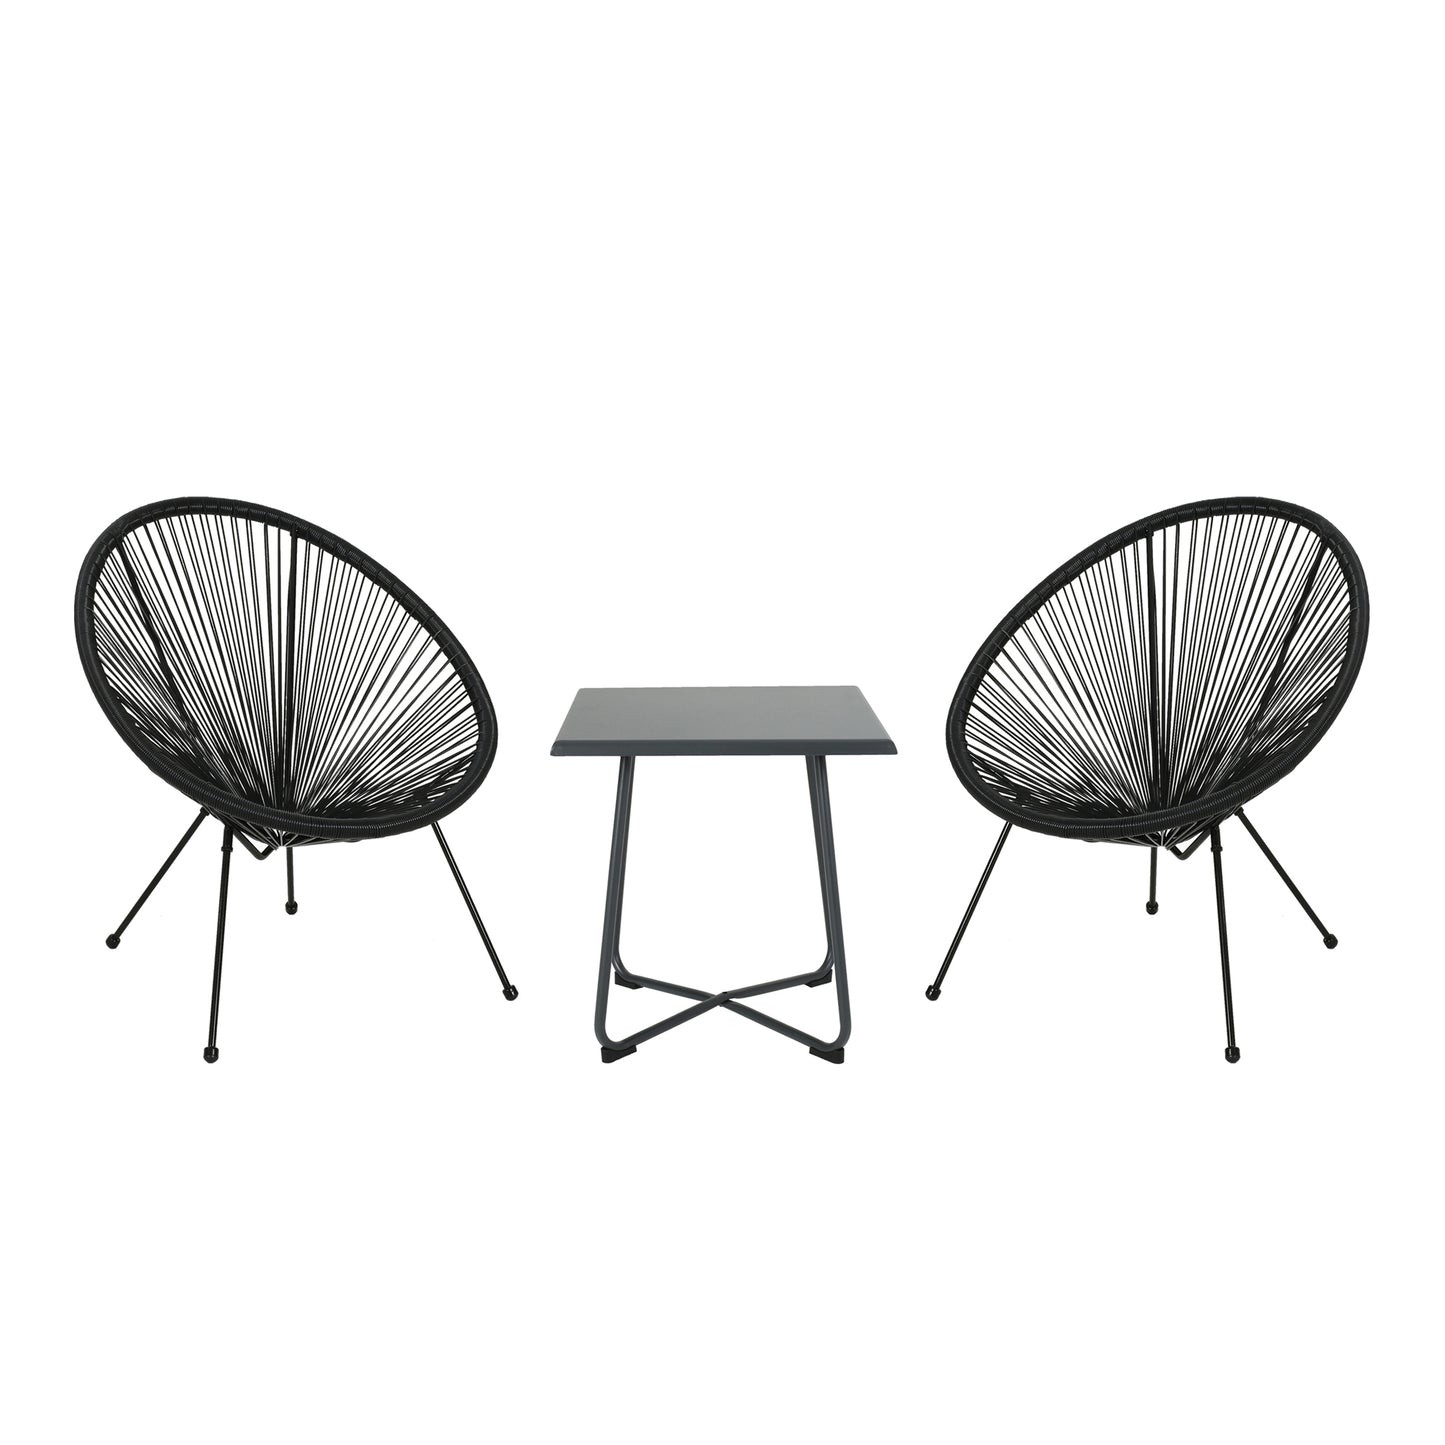 Major Outdoor Woven 3 Piece Chat Set